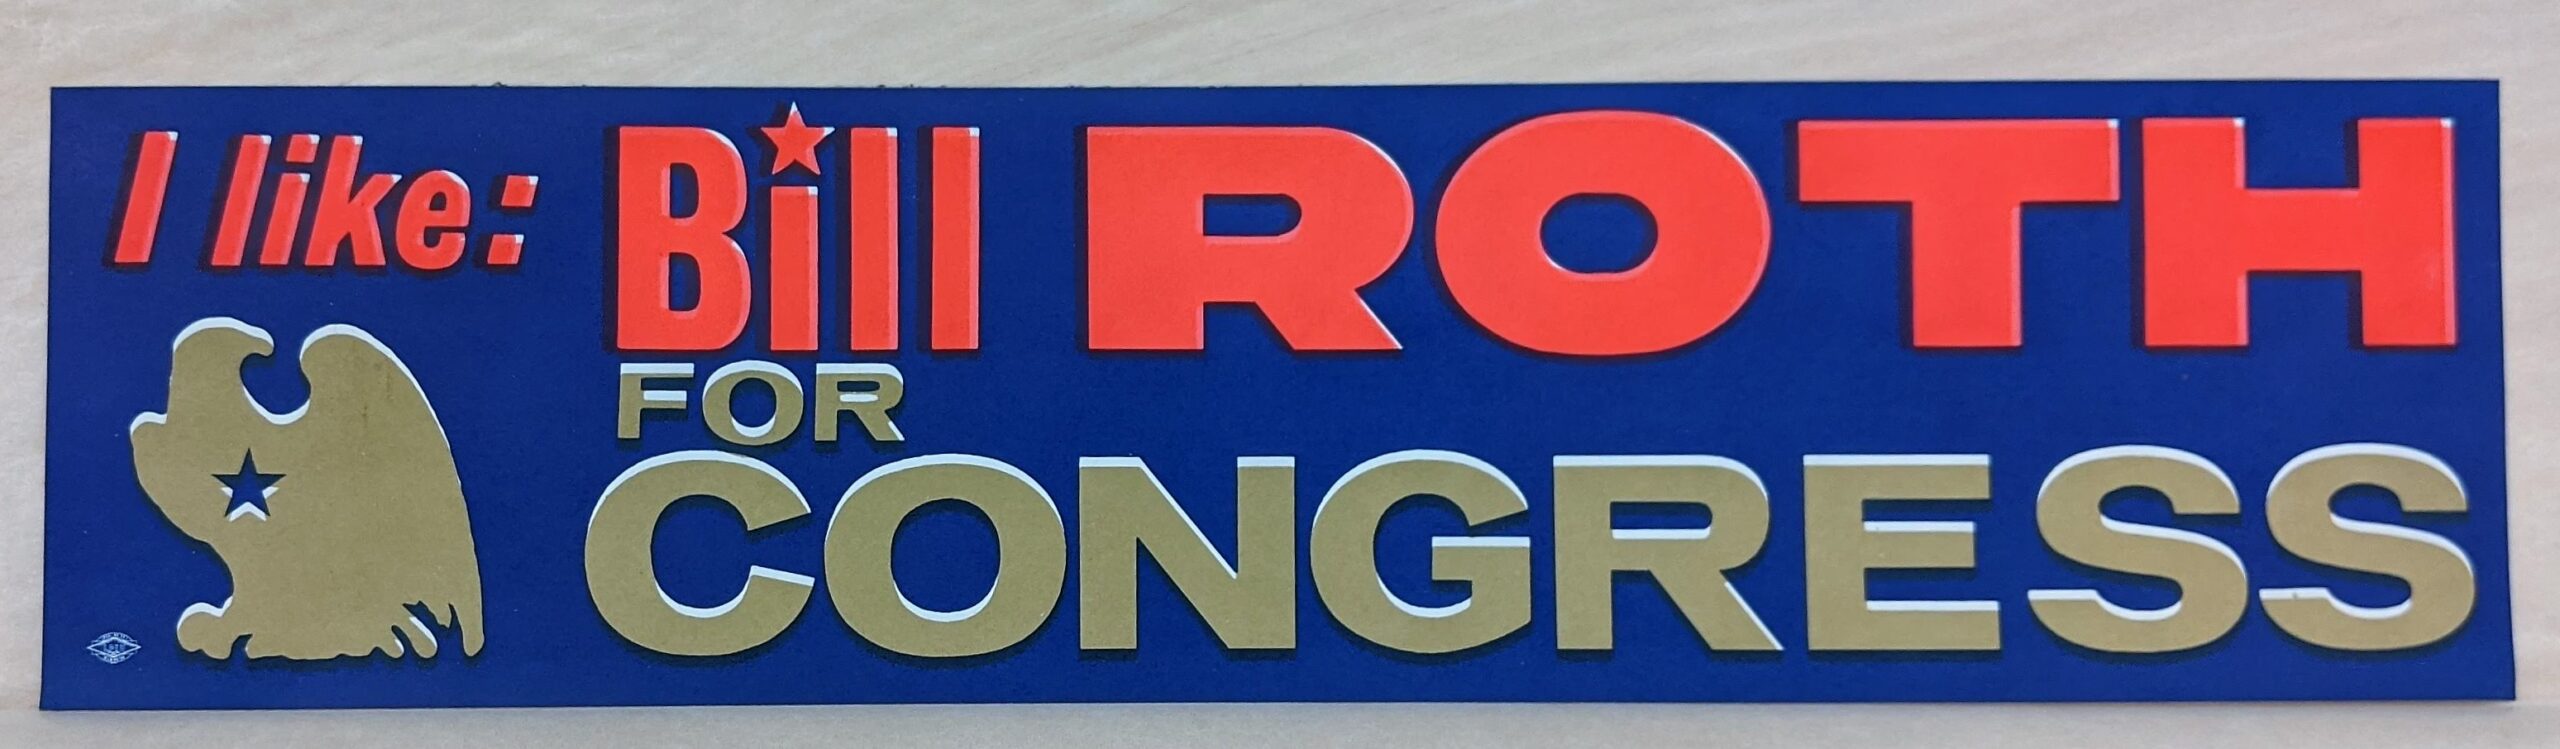 Creator unknown, “I like Bill Roth for Congress” bumper sticker, 1966-1968, from the Jerome O. Herlihy political campaign ephemera collection